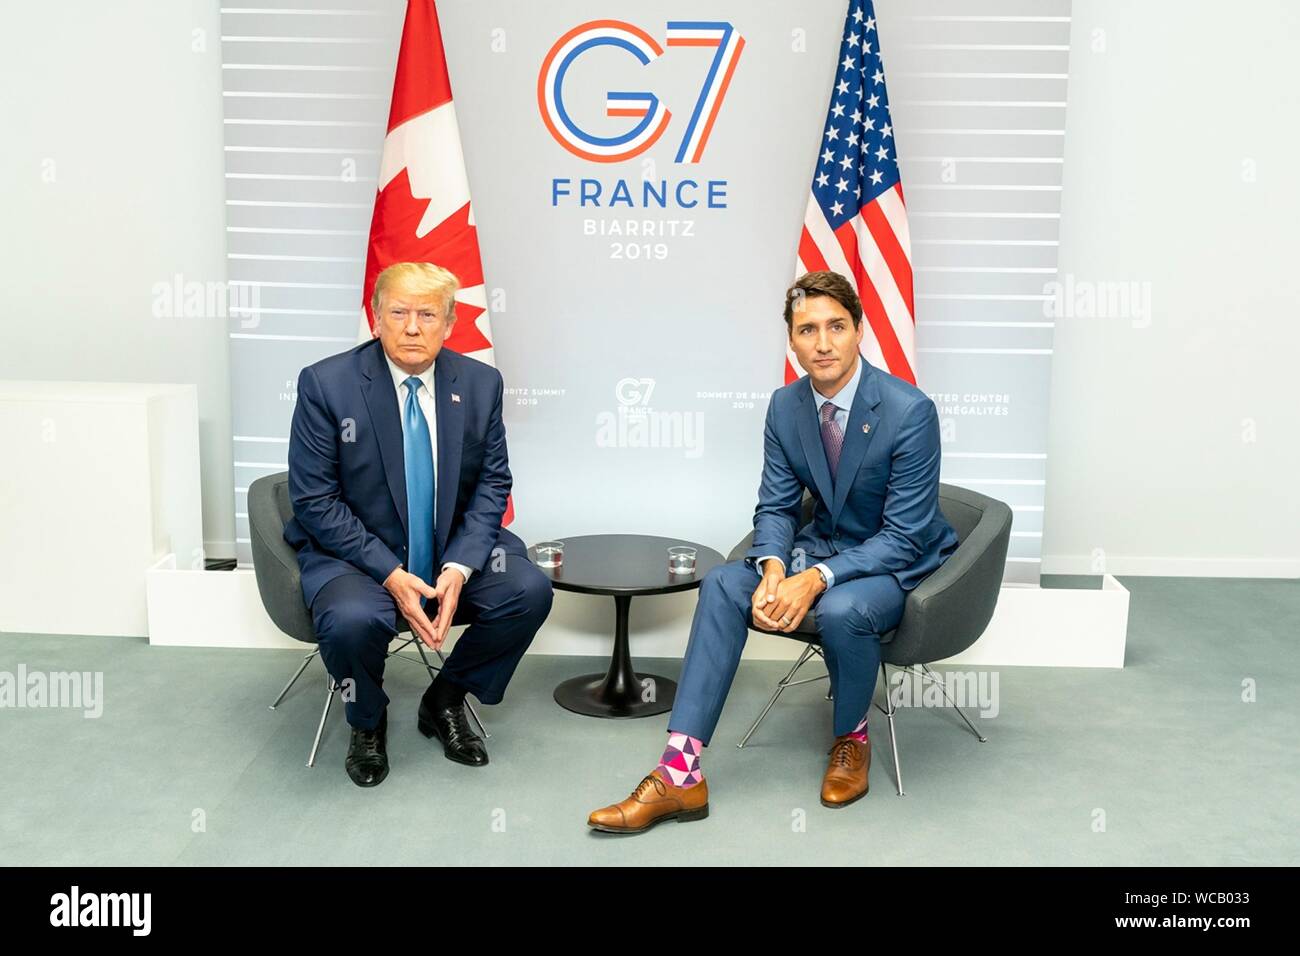 U.S. President Donald Trump with Canadian Prime Minister Justin Trudeau, right, prior to their bilateral meeting on the sidelines of the G7 Summit at the Centre de Congrés Bellevue August 25, 2019 in Biarritz, France. Stock Photo